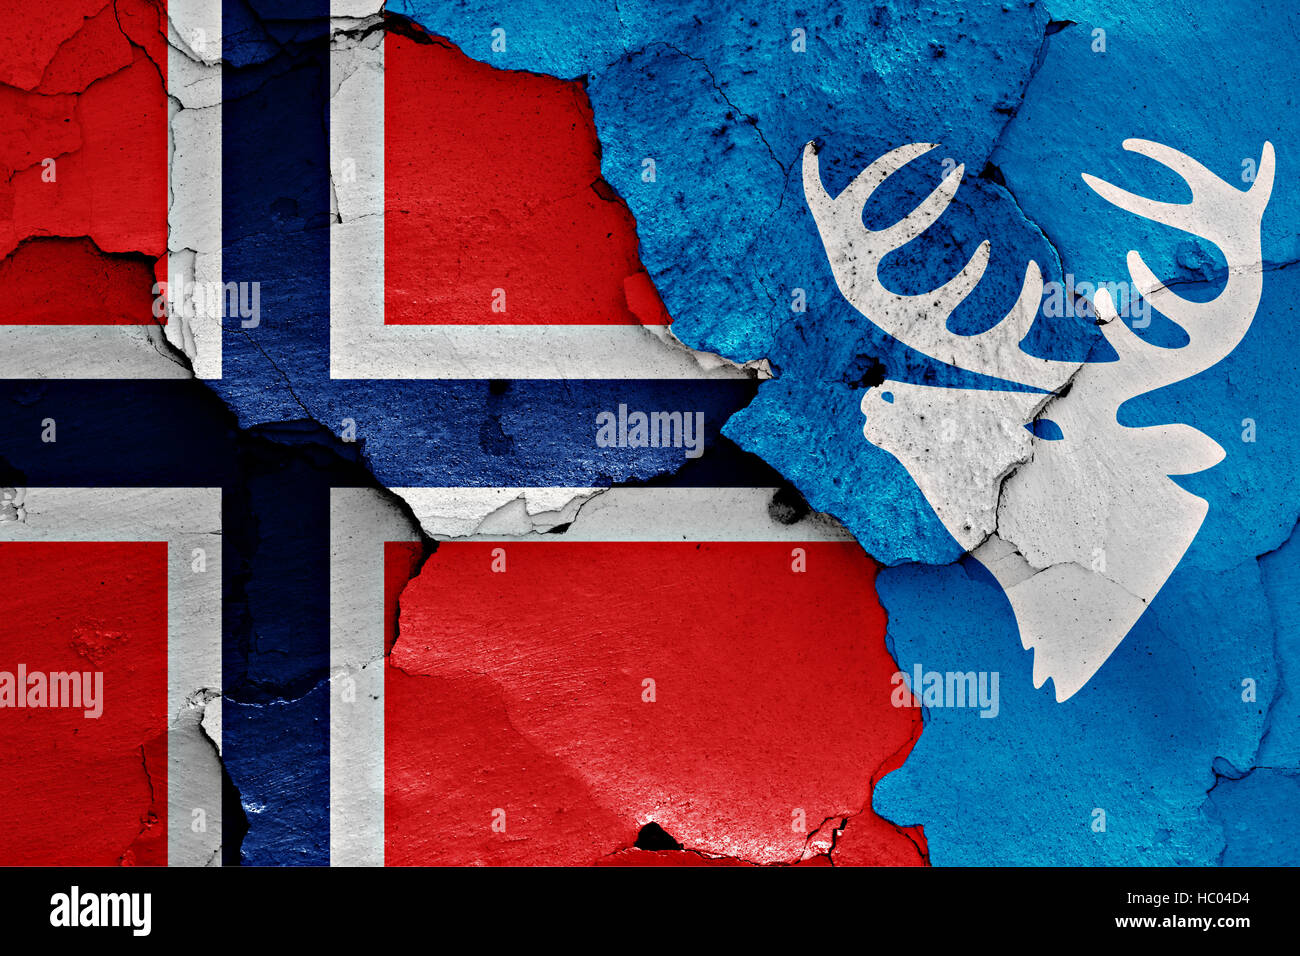 flags of Norway and Hitra painted on cracked wall Stock Photo